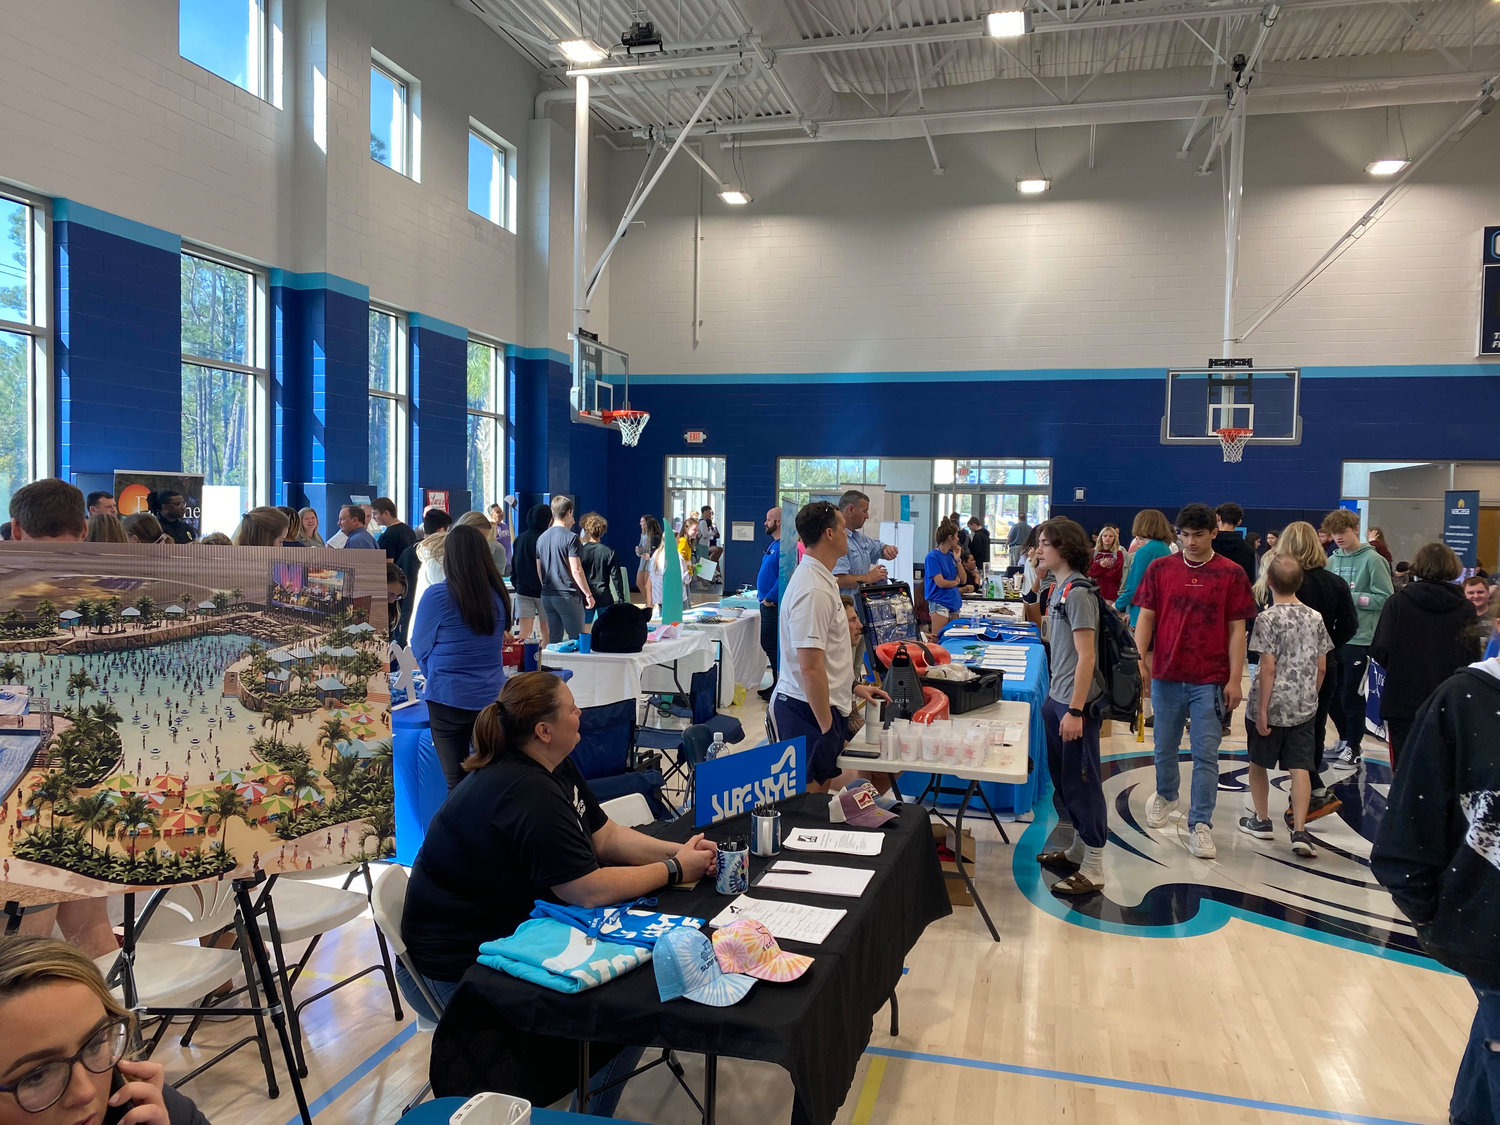 A job fair organized by Gateway was recently held at Foley High School. Gateway representatives will be the speakers at the Foley Public Library’s first Lunch & Learn of the year.